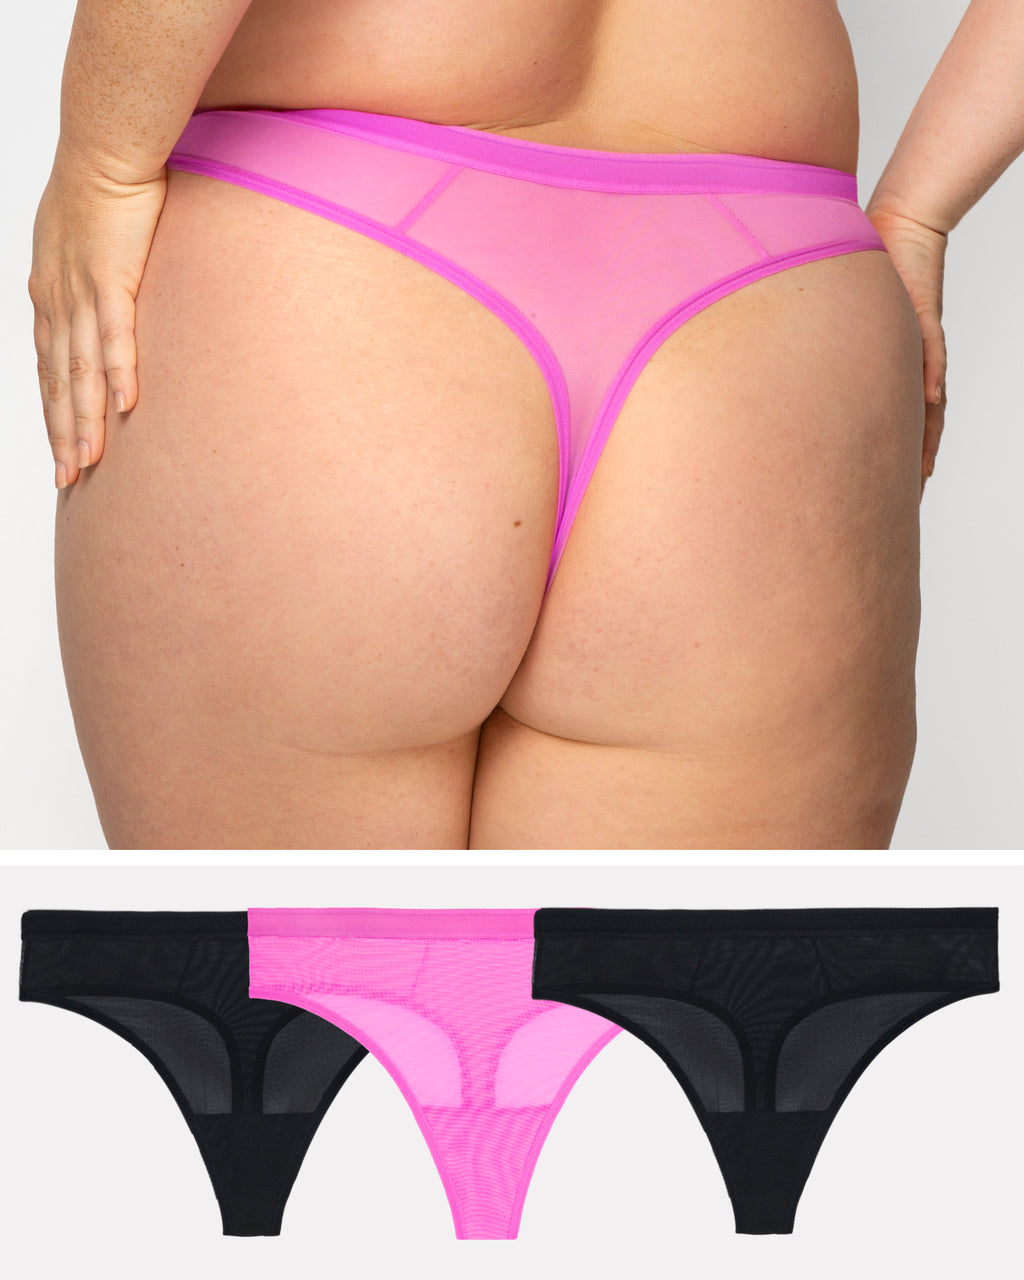 Womens Thongs Underwear Breathable Comfortable G-string High Cut Knickers 